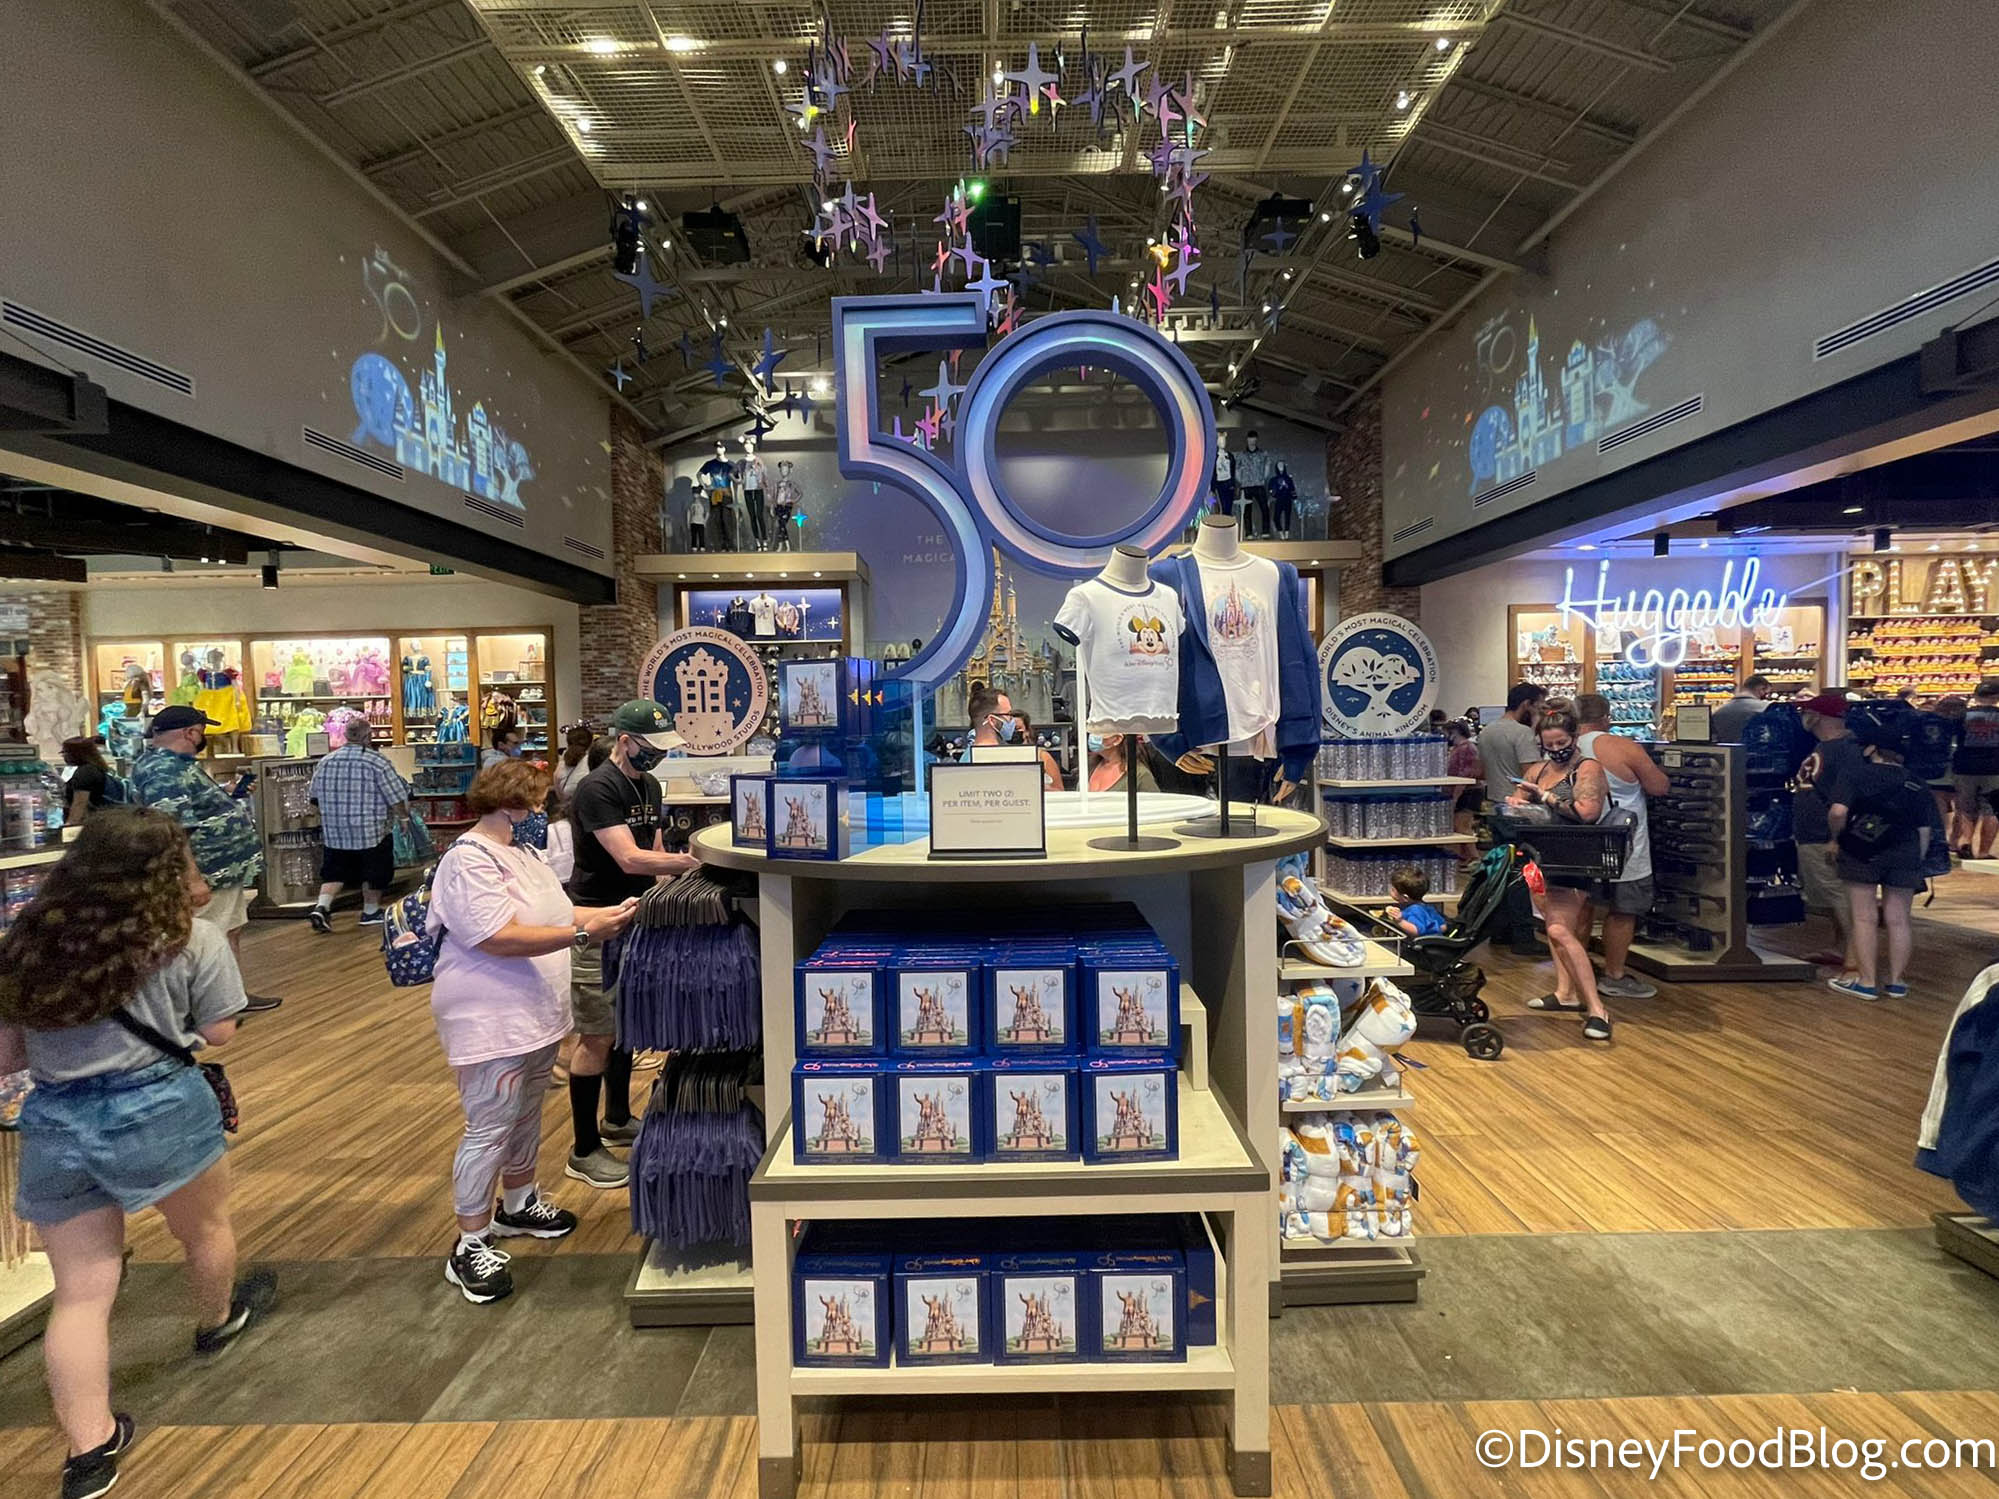 PHOTOS: See the NEW Refillable Hotel Mugs for Disney World's 50th  Anniversary